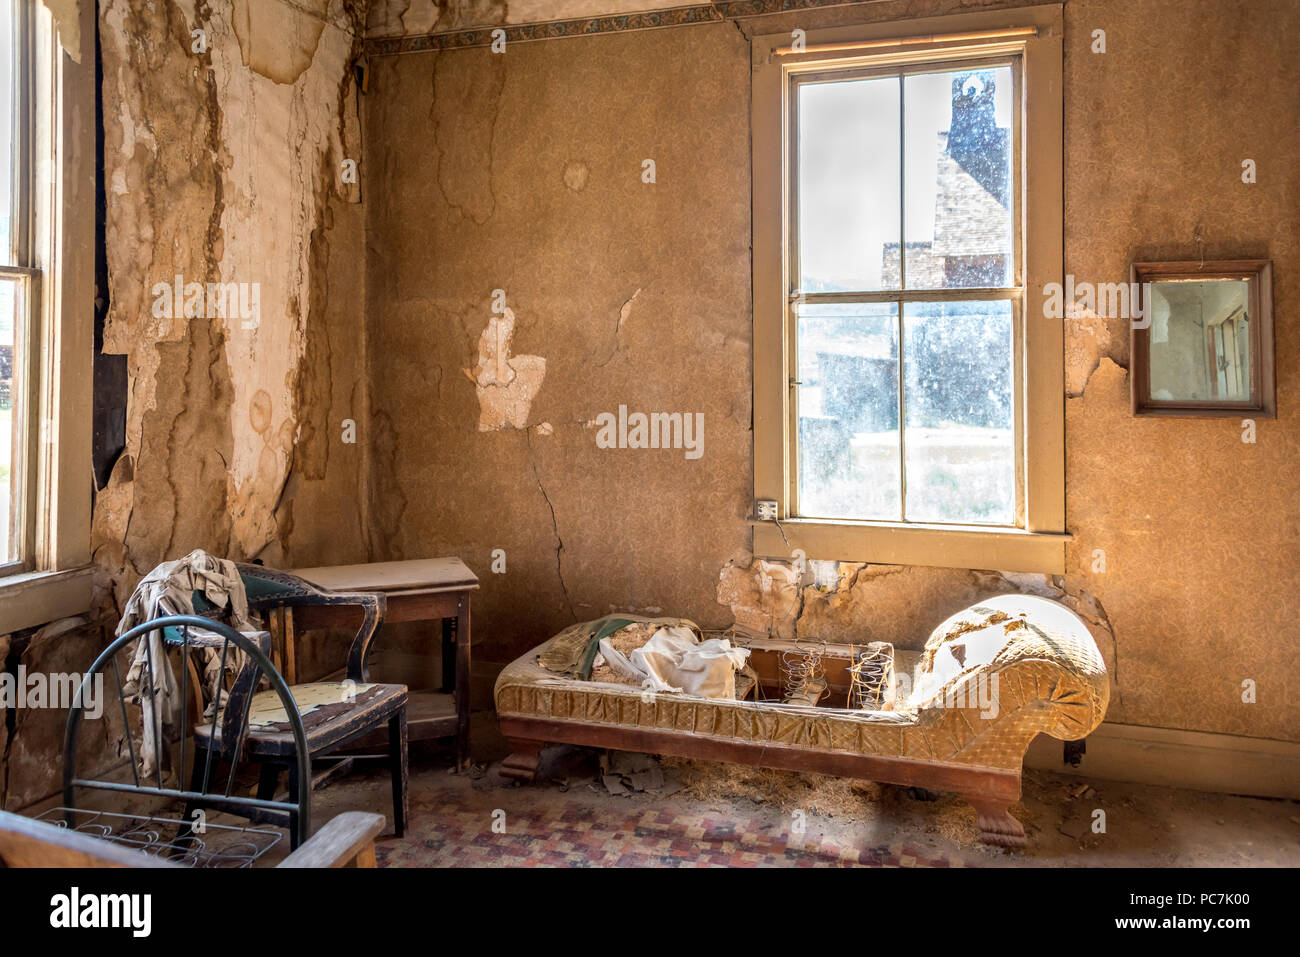 Interior of the Miller house w/ peeling wallpaper, cracked plaster, deteriorating furniture, at Bodie State Historic Park, a California ghost town. Stock Photo